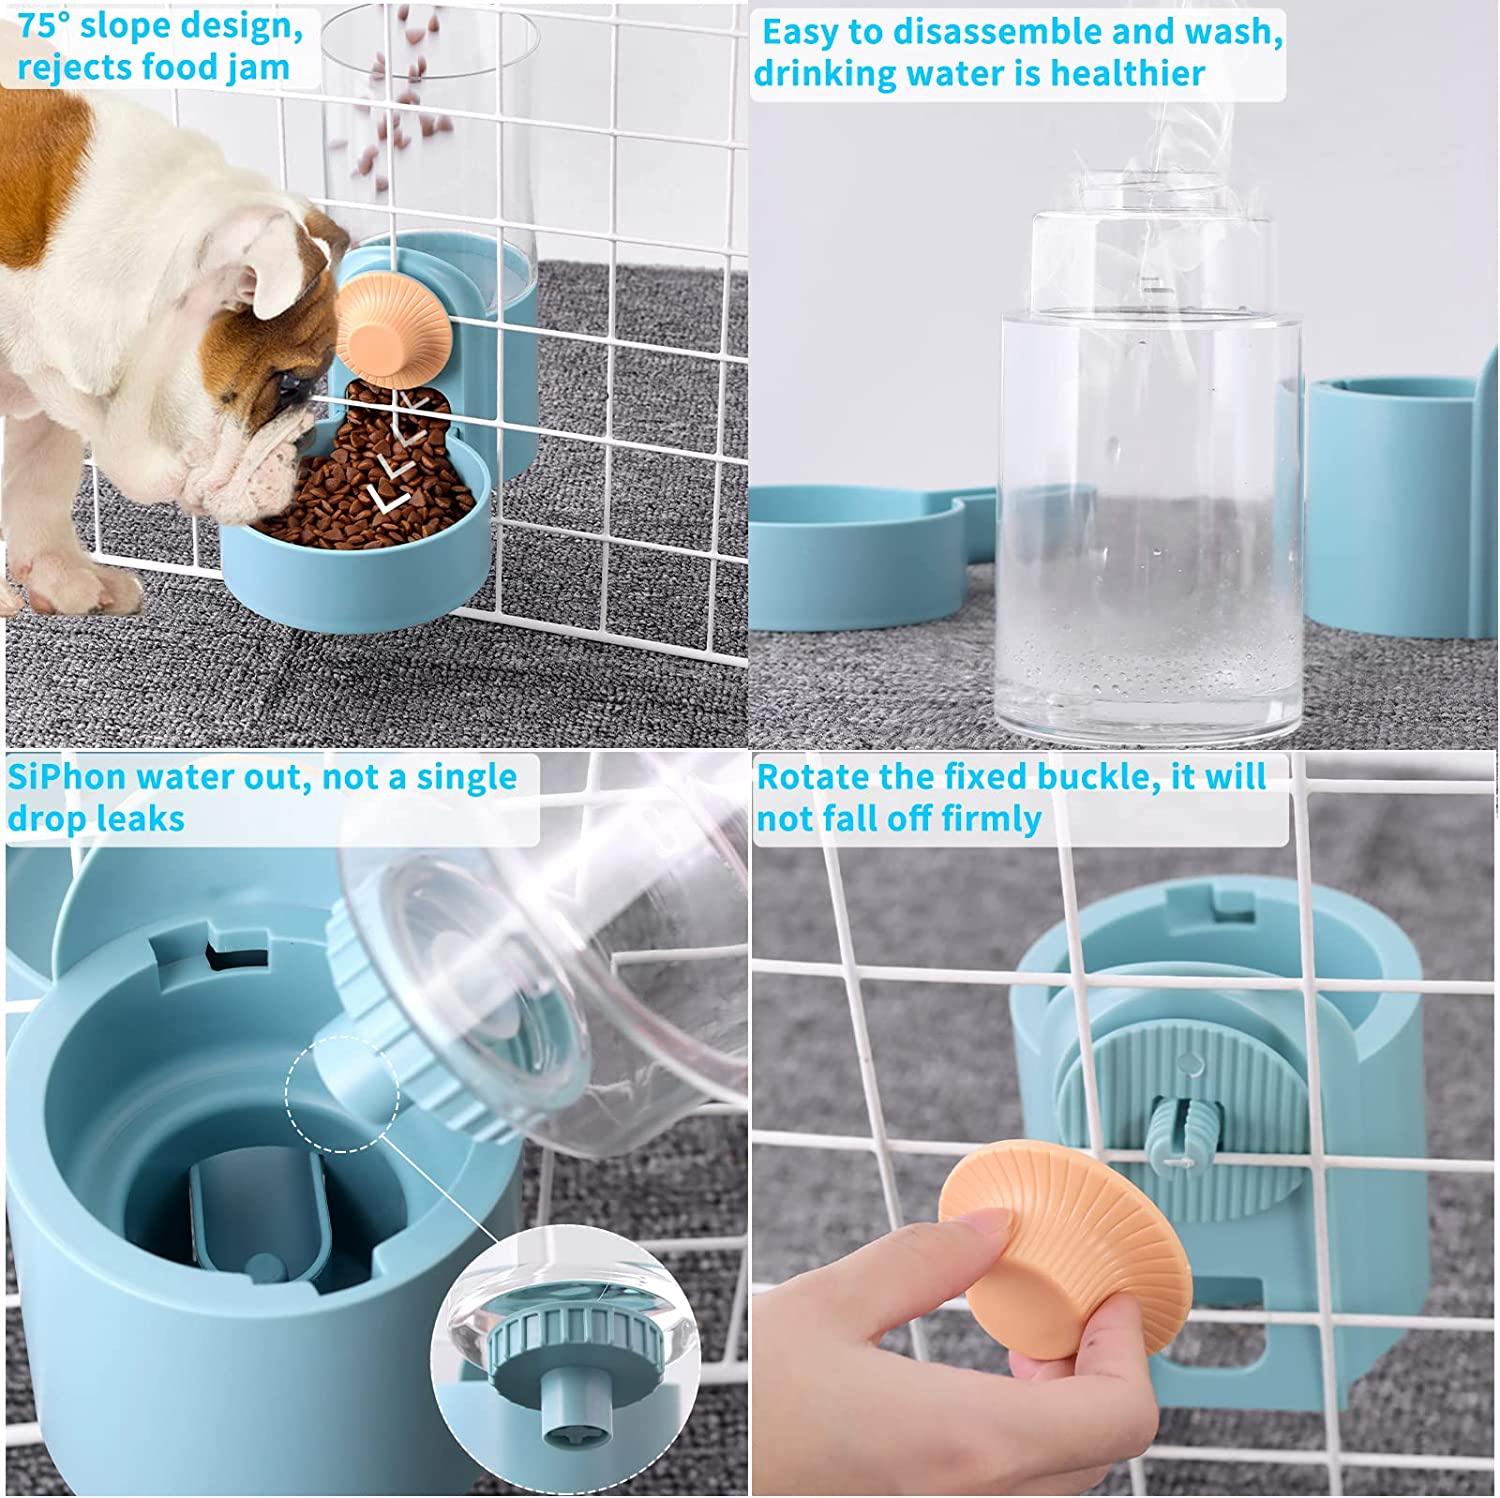 How to Make a Pet Automatic Cold Water Feeder - Unique Creations By Anita